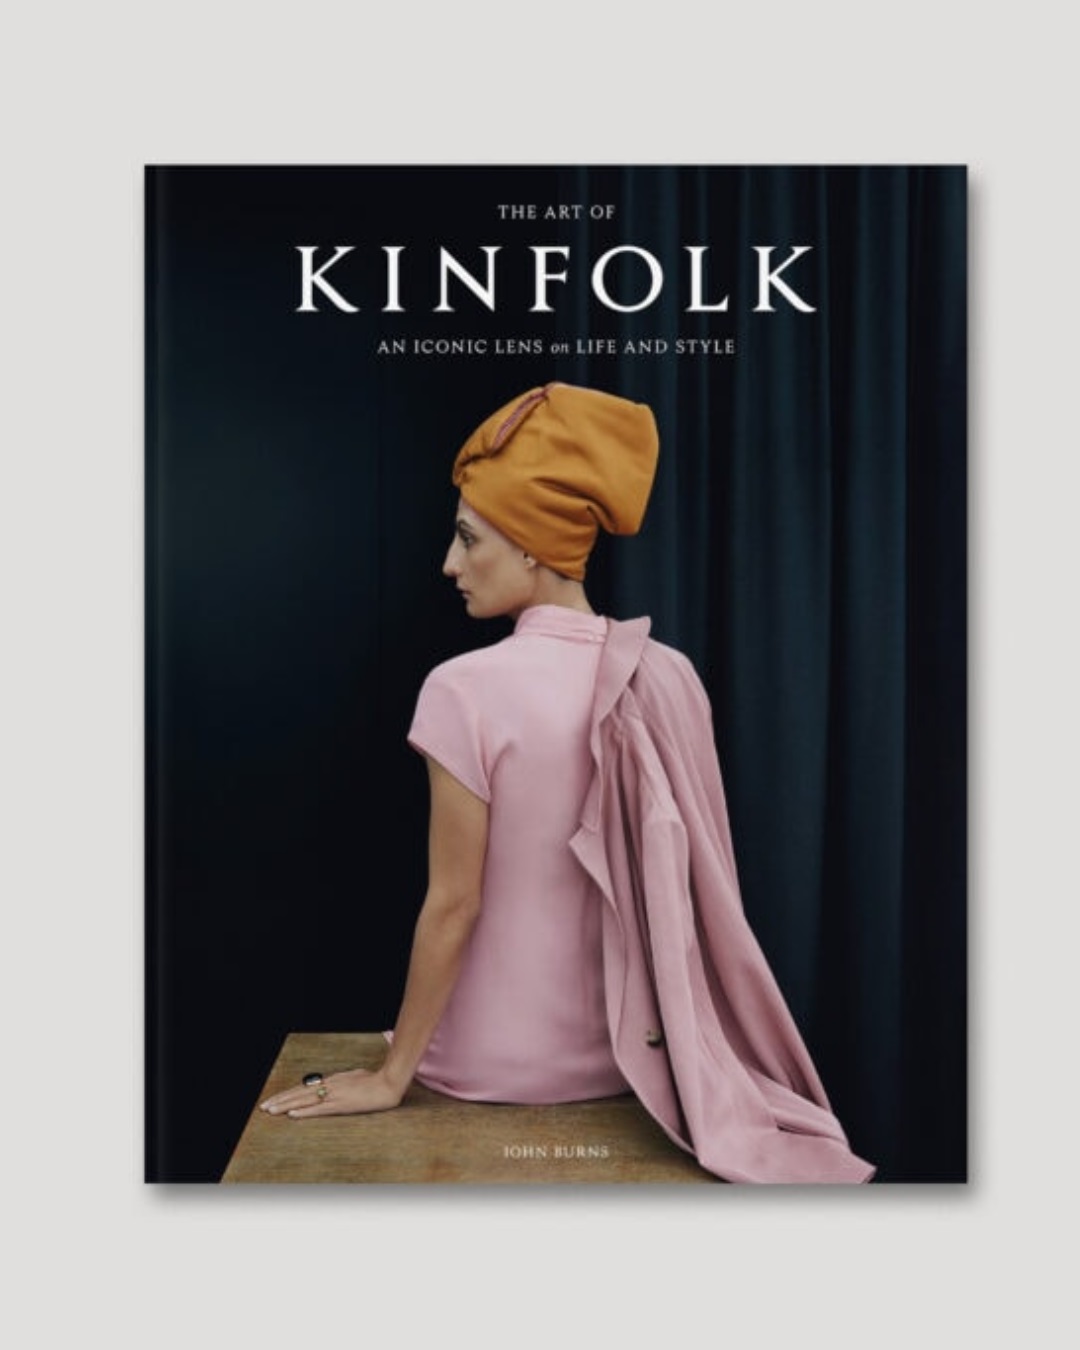 The art of kinfolk book with woman in pink and orange on cover